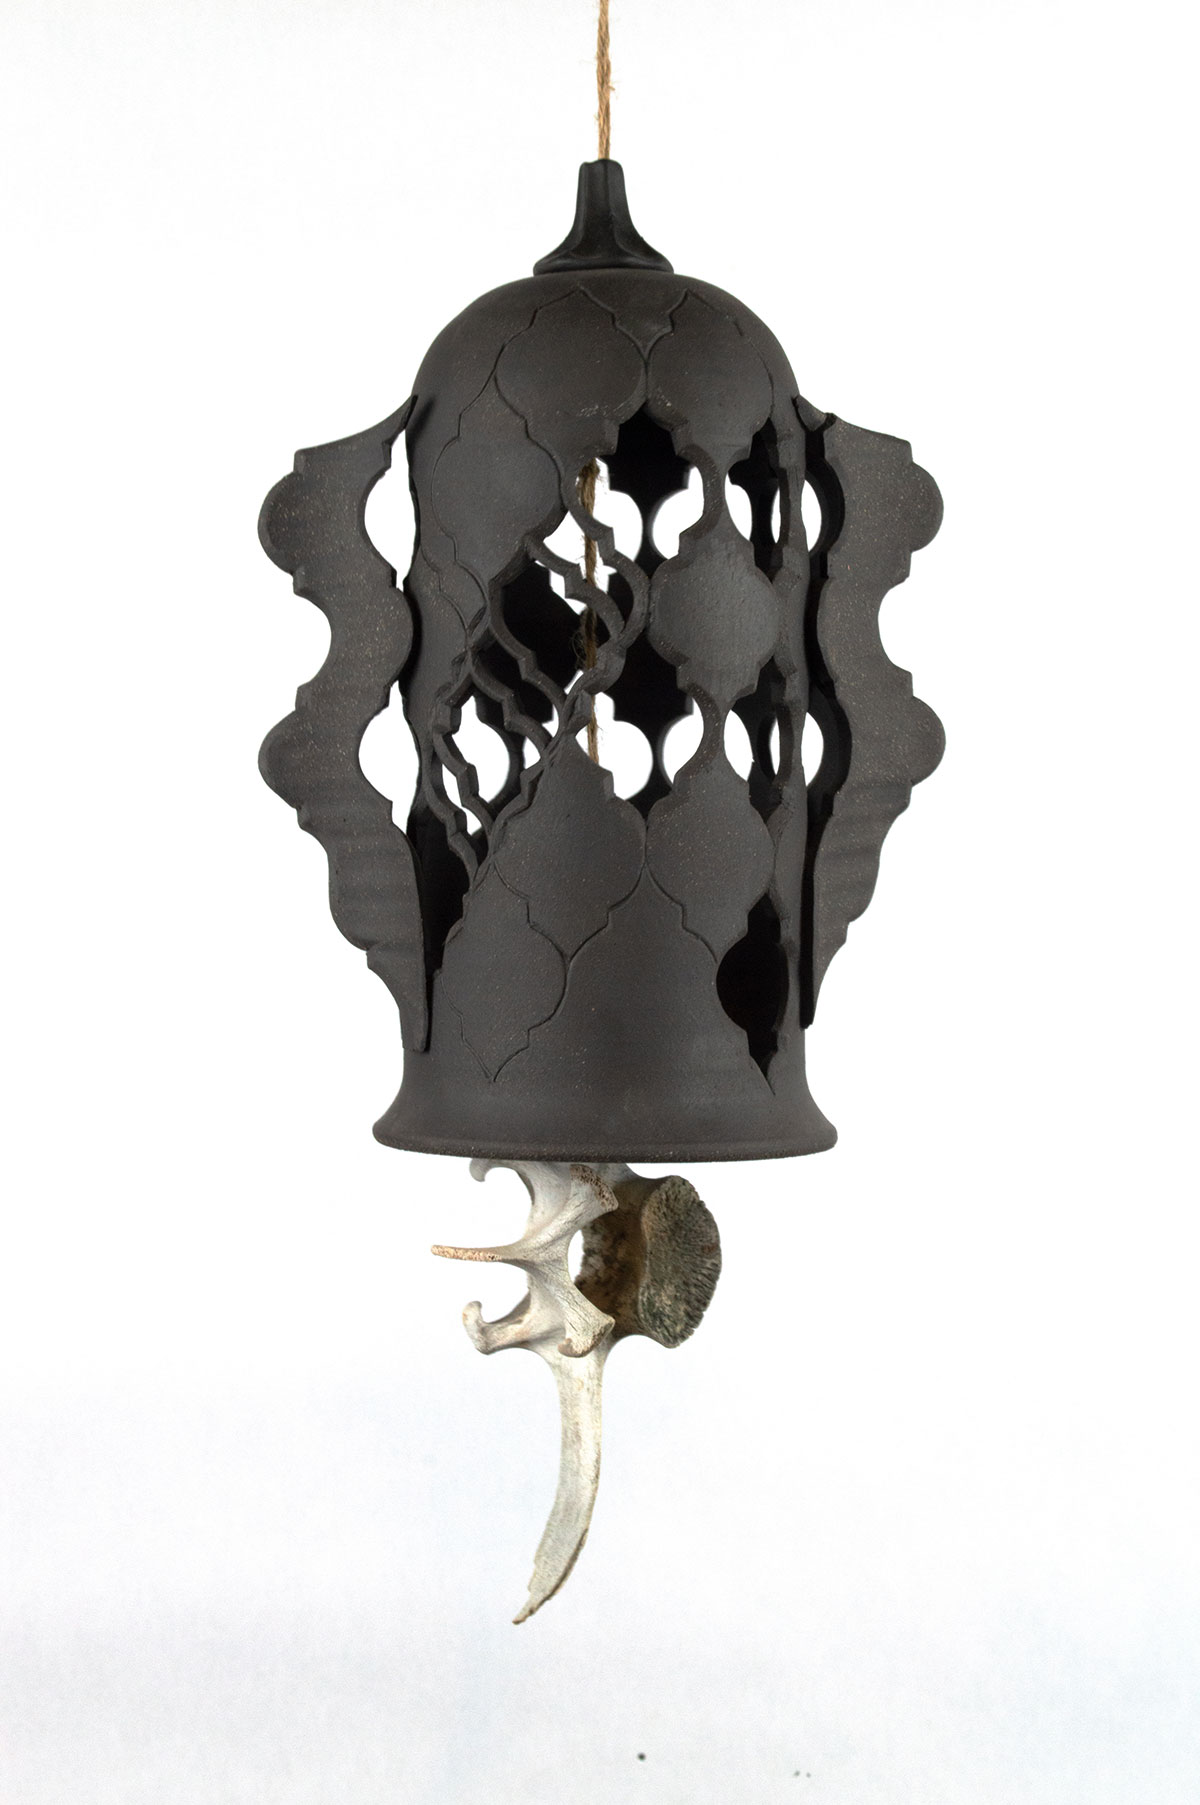 A black ceramic bell with carved and incised ornamental pattern is suspended with a cow vertebra as its clapper.